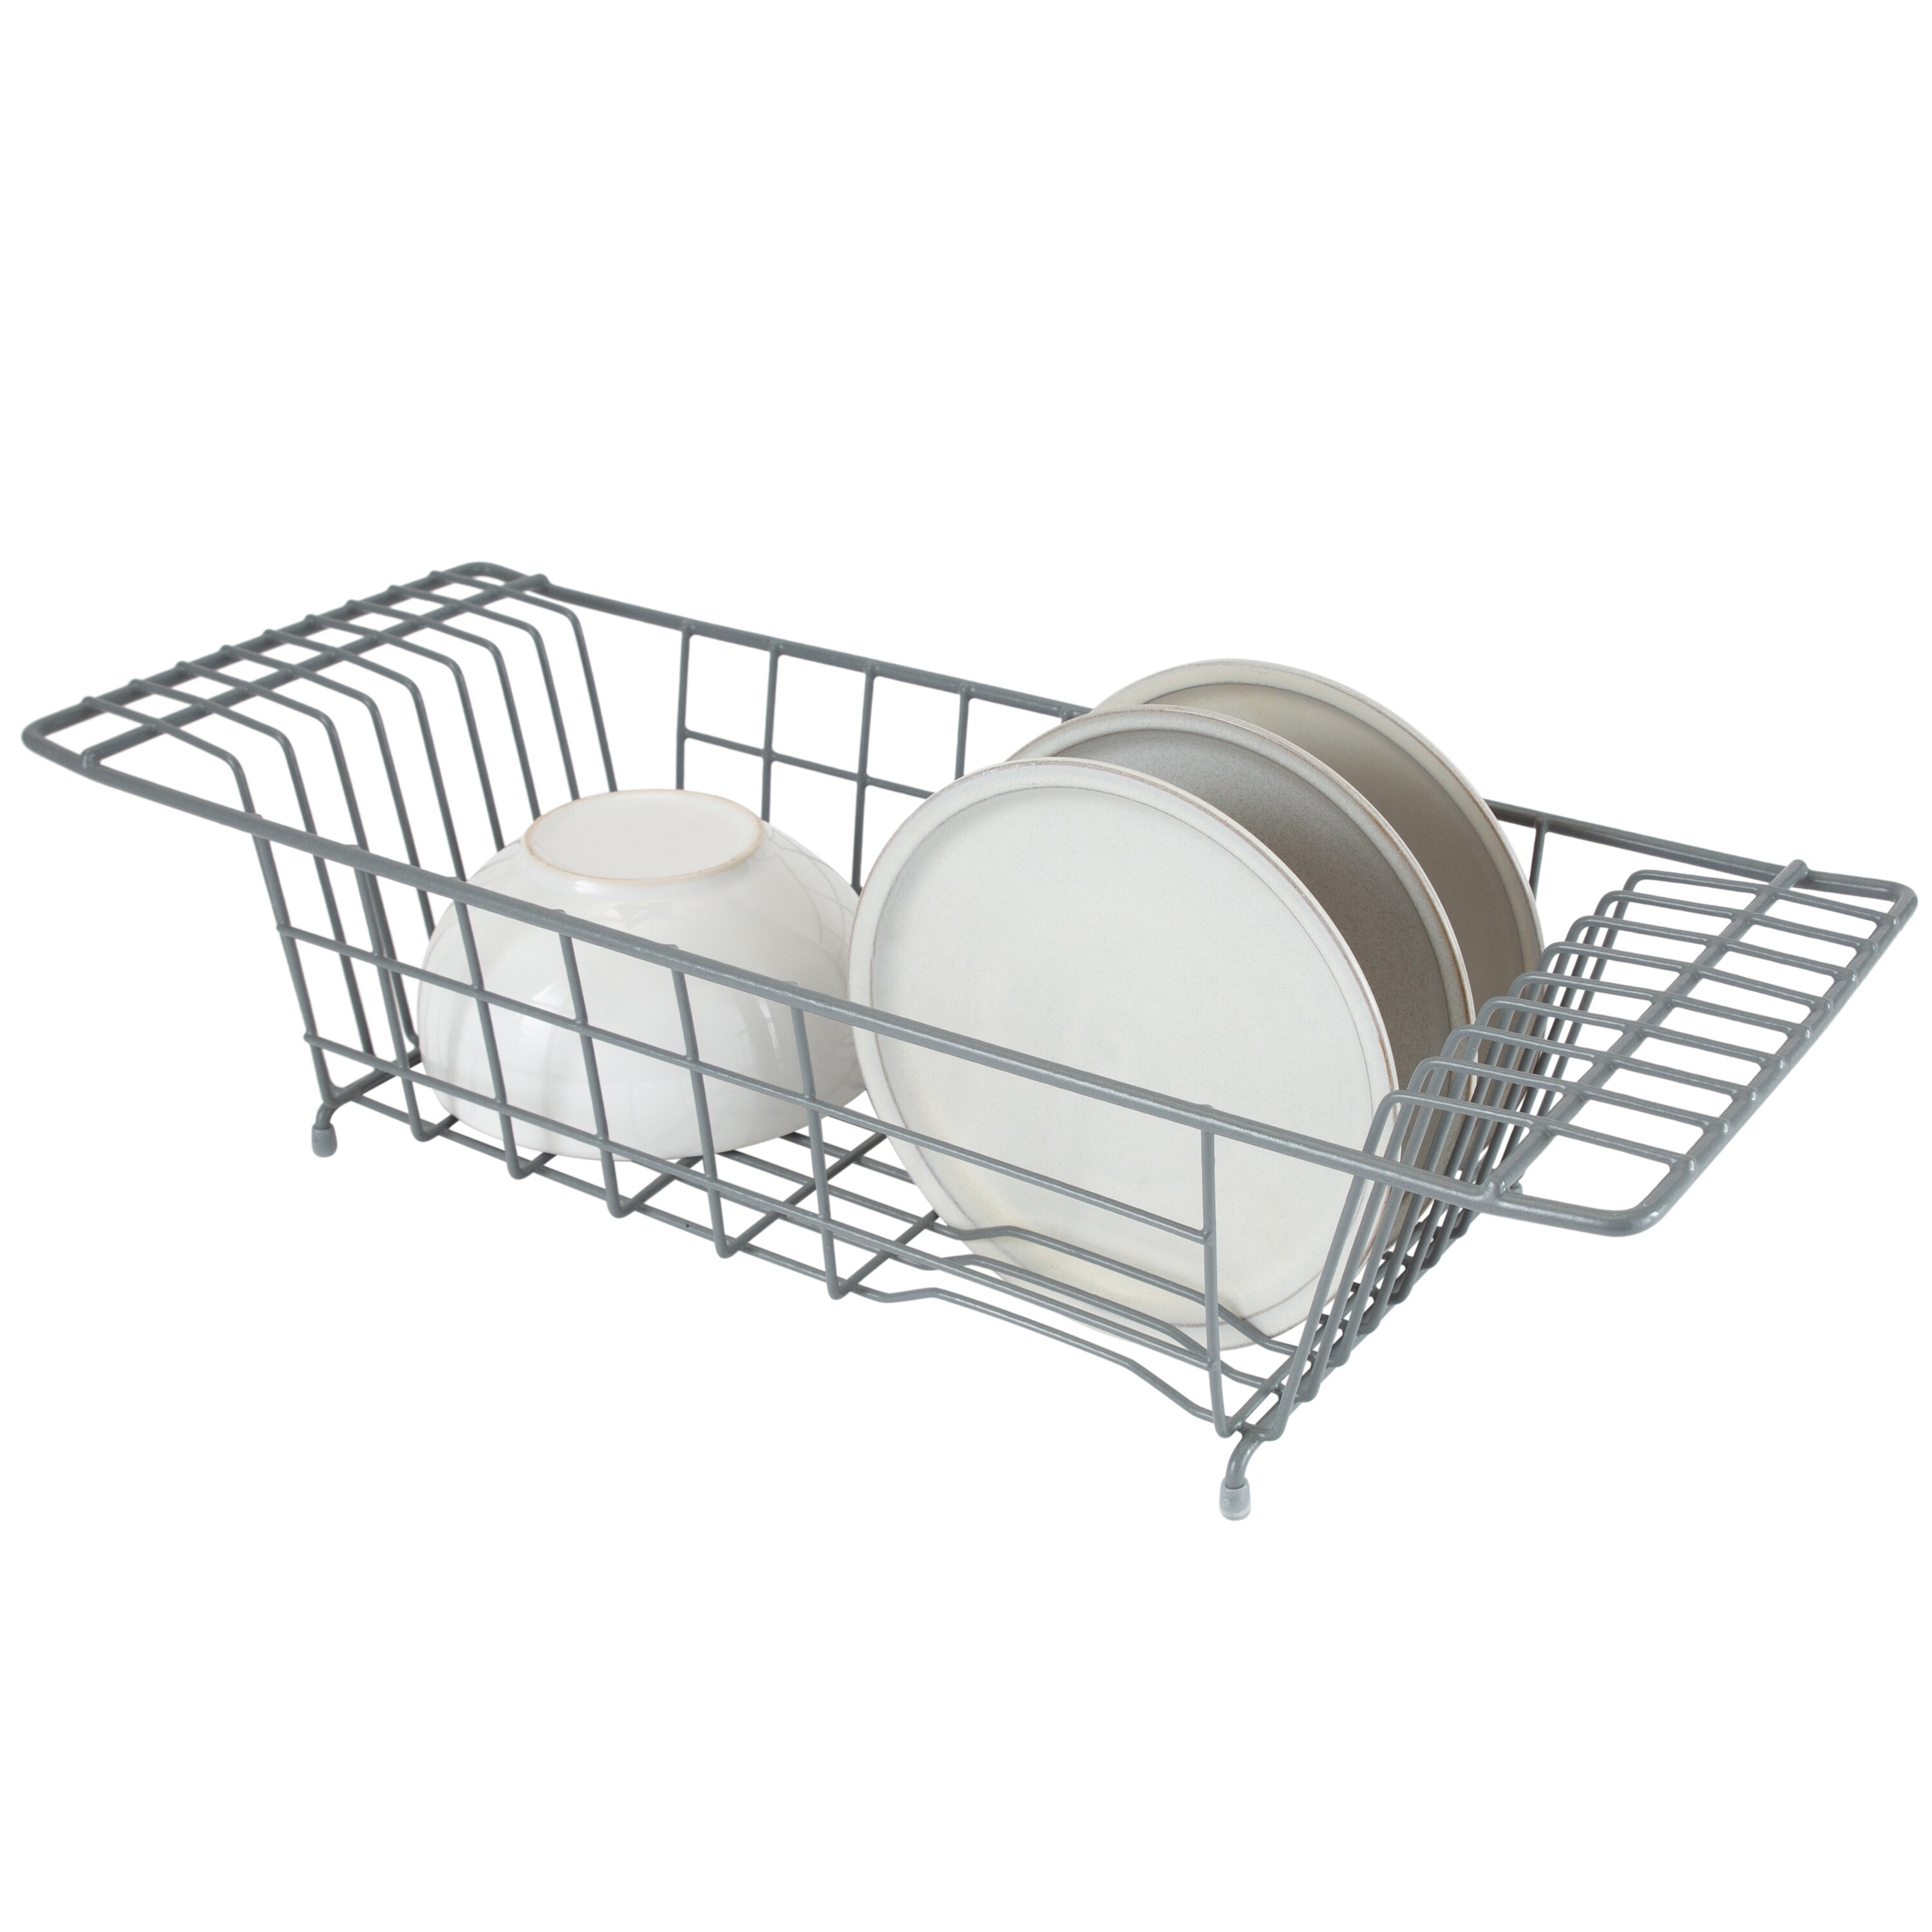 https://ak1.ostkcdn.com/images/products/is/images/direct/7de1afa200be9c44462a455331a788bb2c9f254a/Kitchen-Details-Grey-Over-the-sink-Dish-Rack.jpg